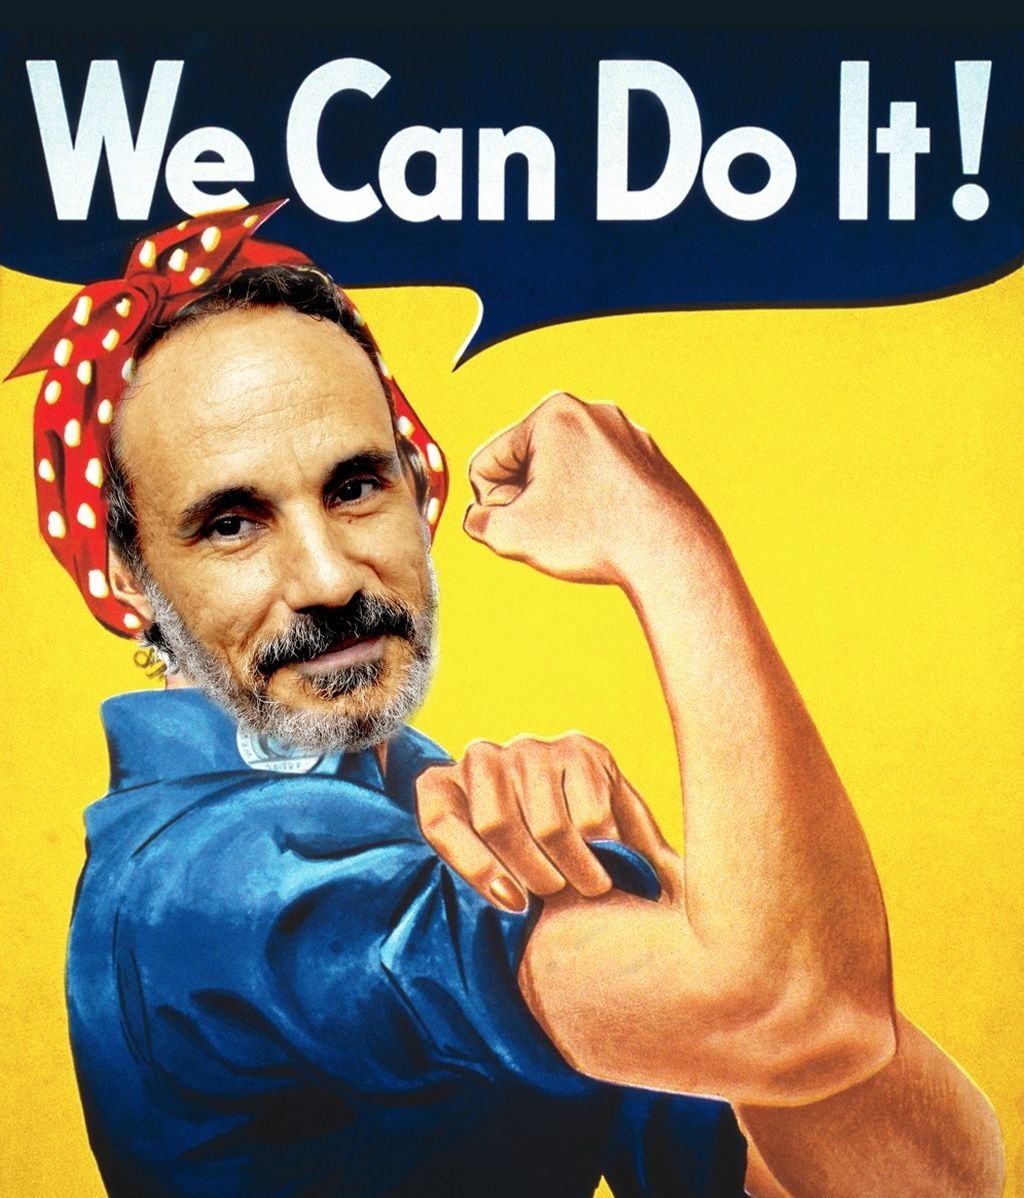 WE CAN DO IT